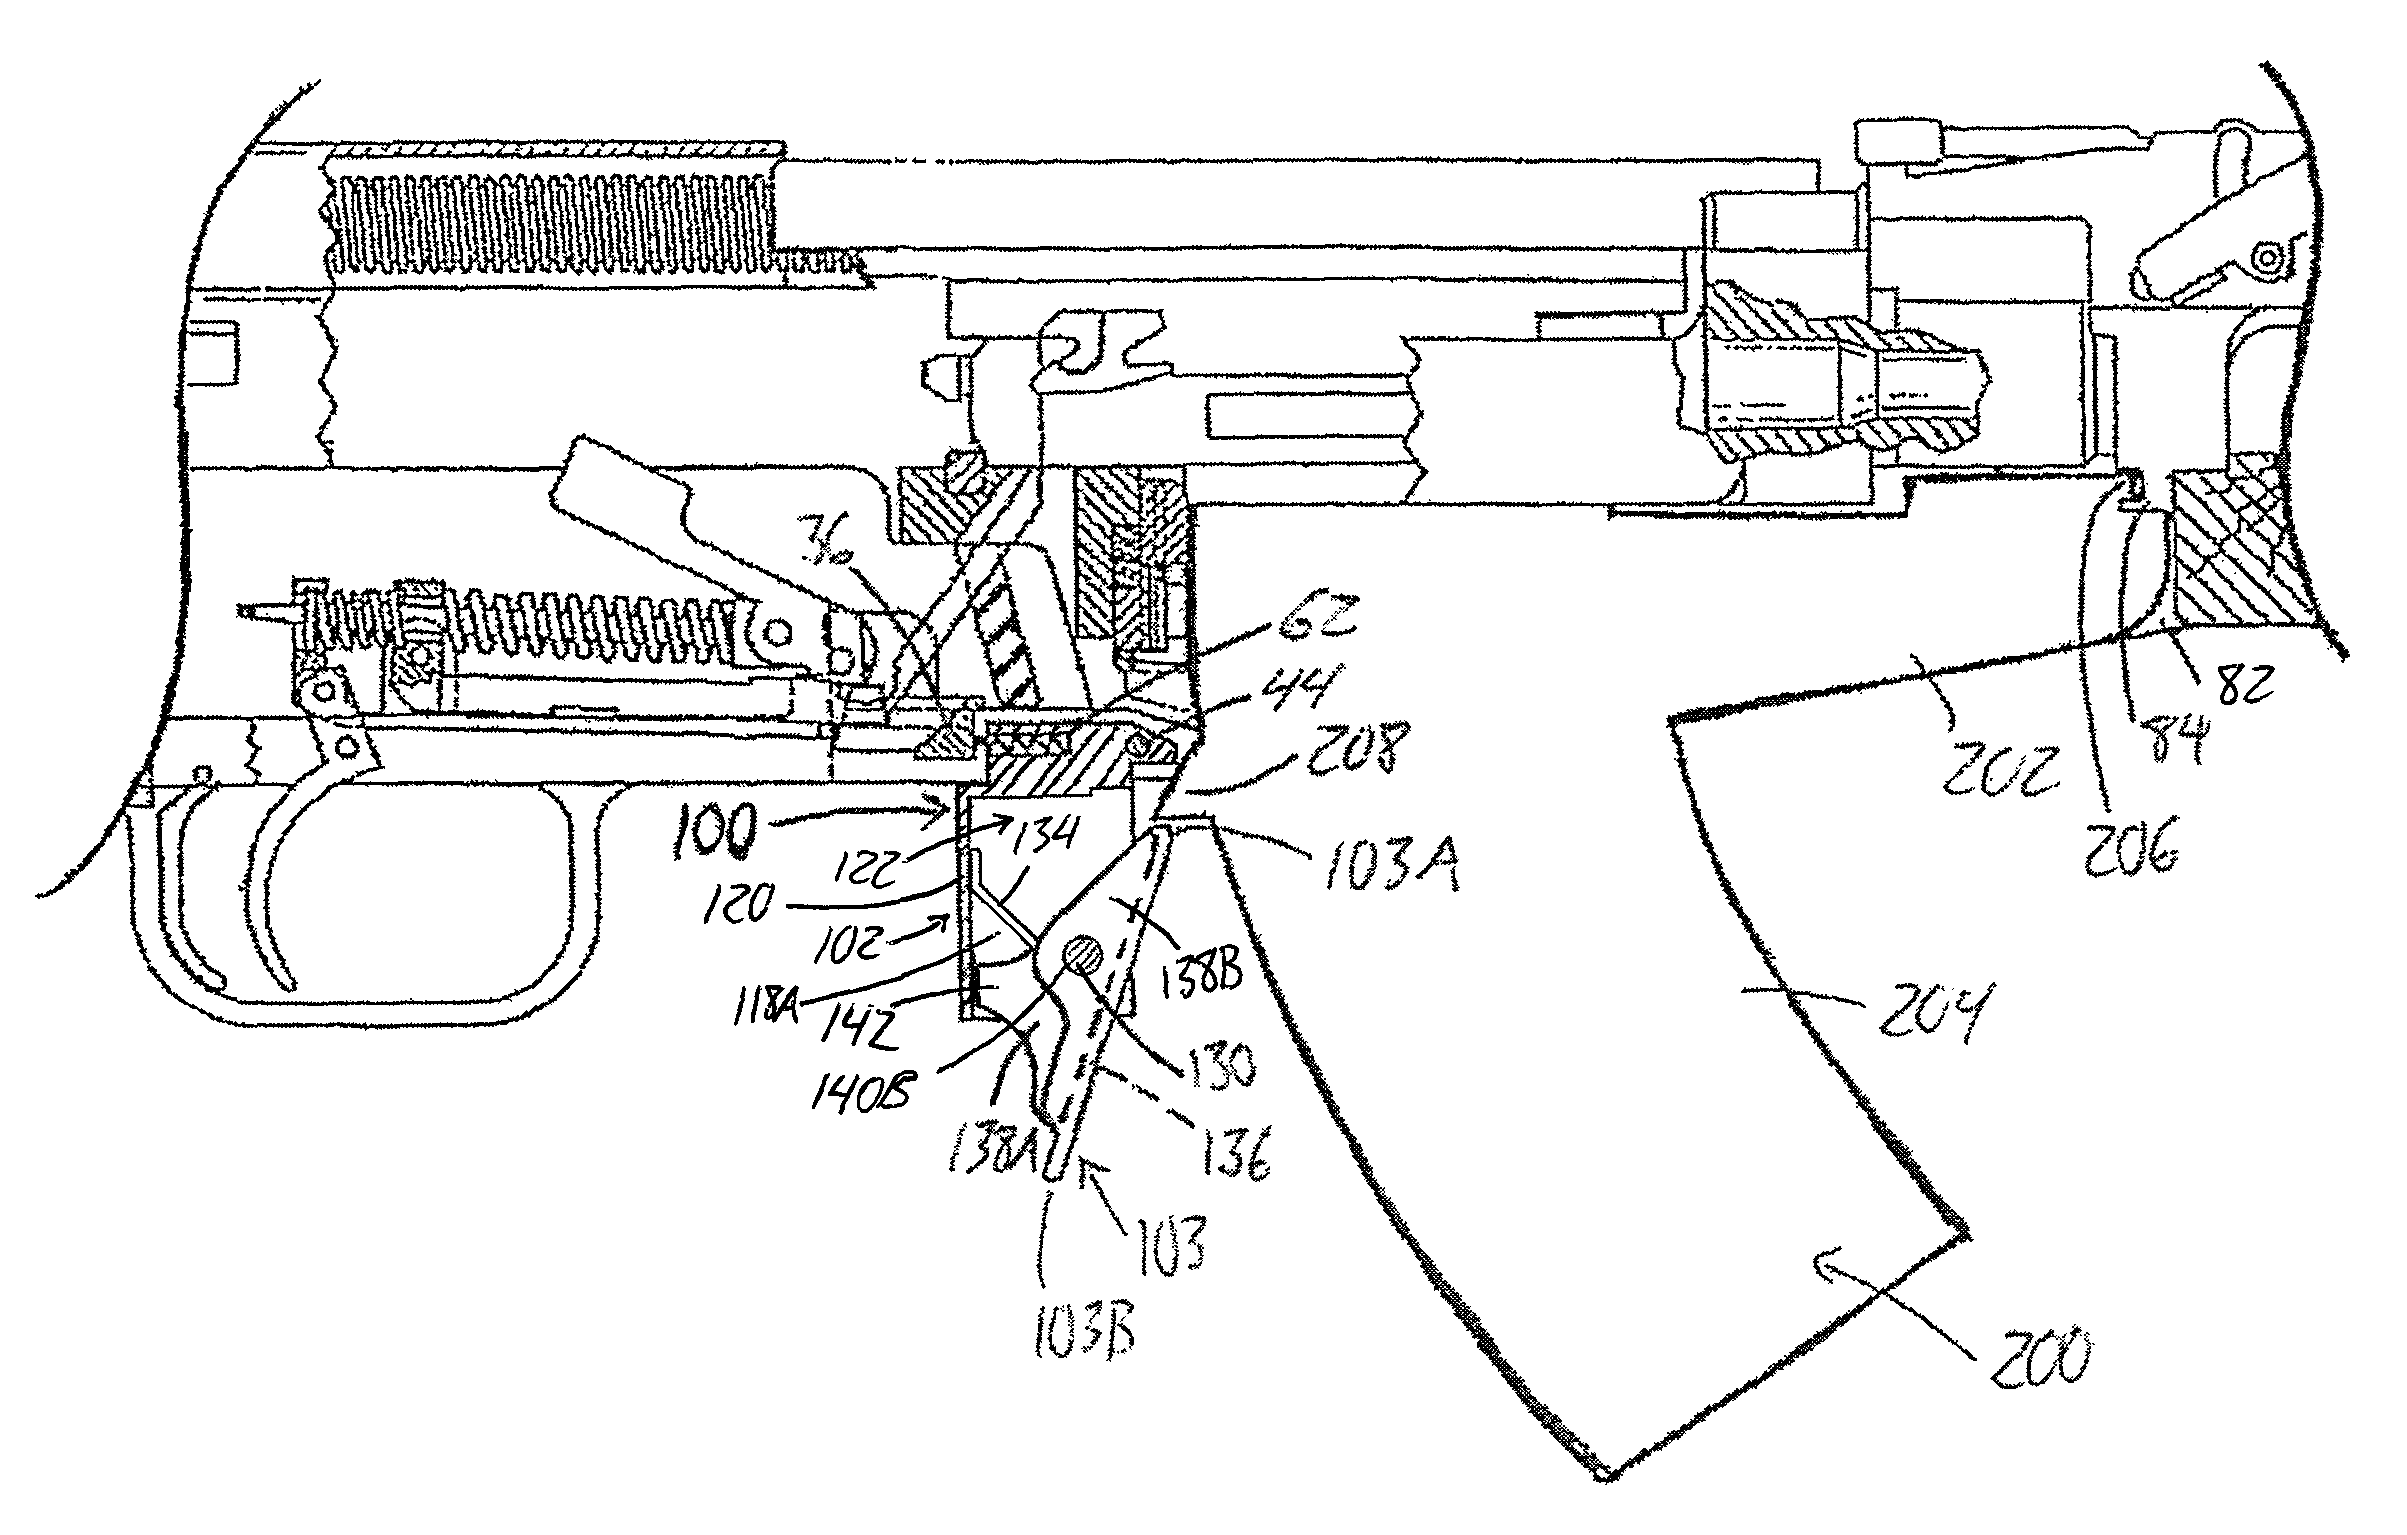 Push-lever magazine release for converting a carbine from clamshell magazines to removable magazines